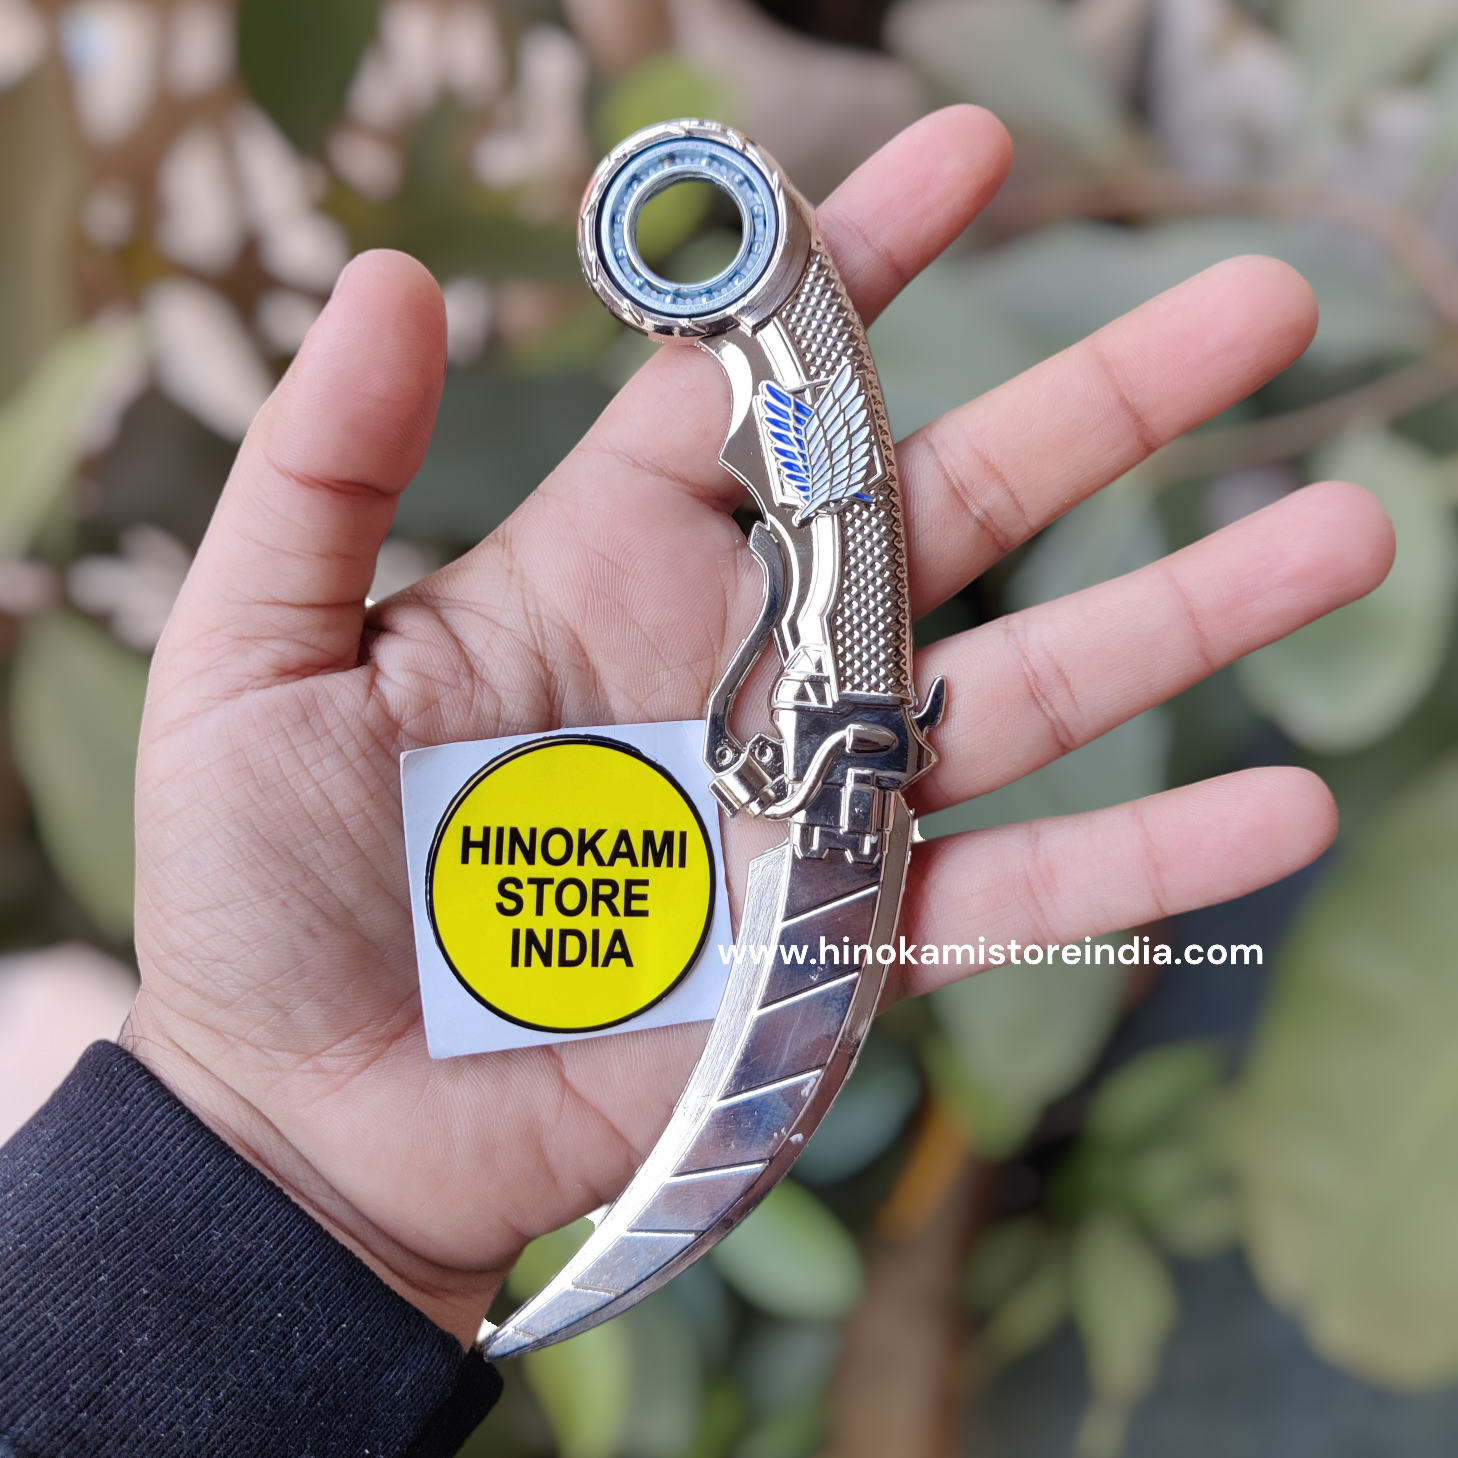 Karambit fidget spinner toys ( FREE STICKERS WITH PREPAID ORDERS )